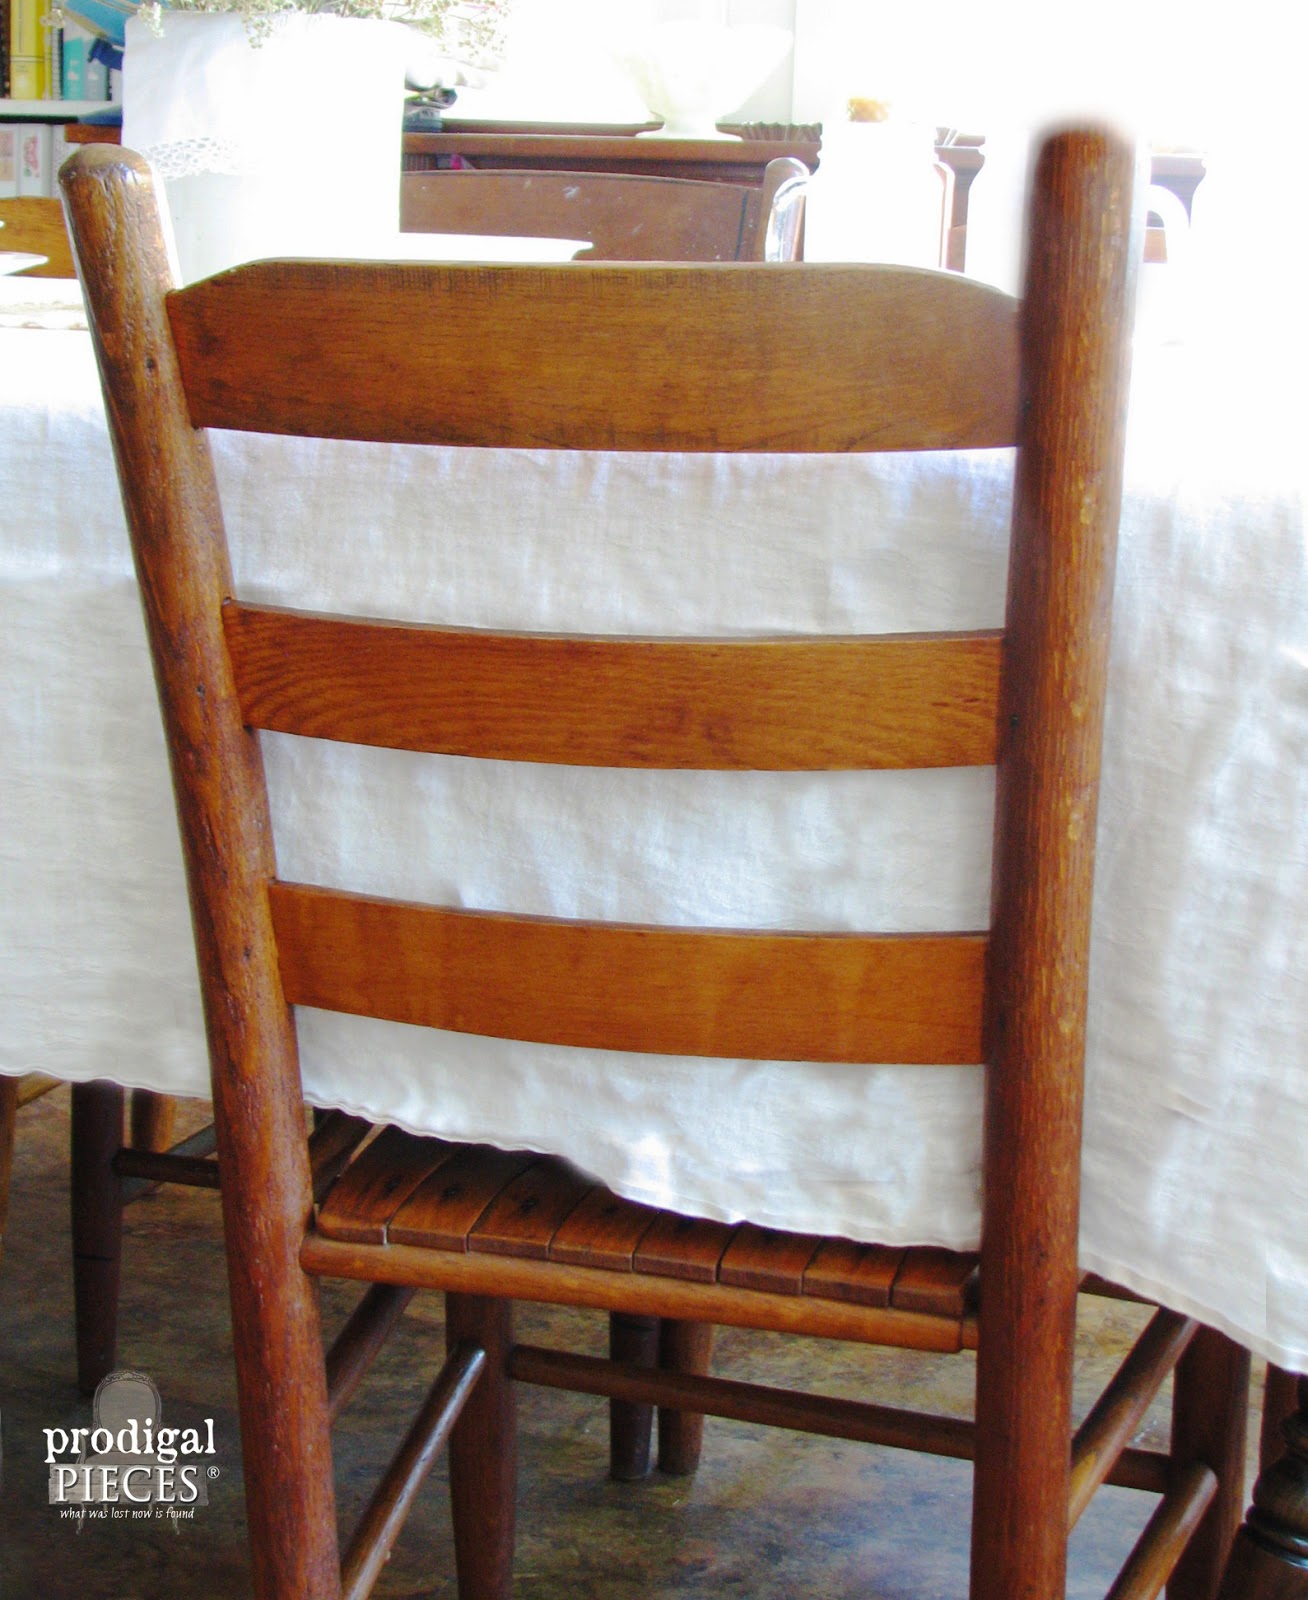 Farmhouse Style Musical Chairs by Prodigal Pieces http://www.prodigalpieces.com